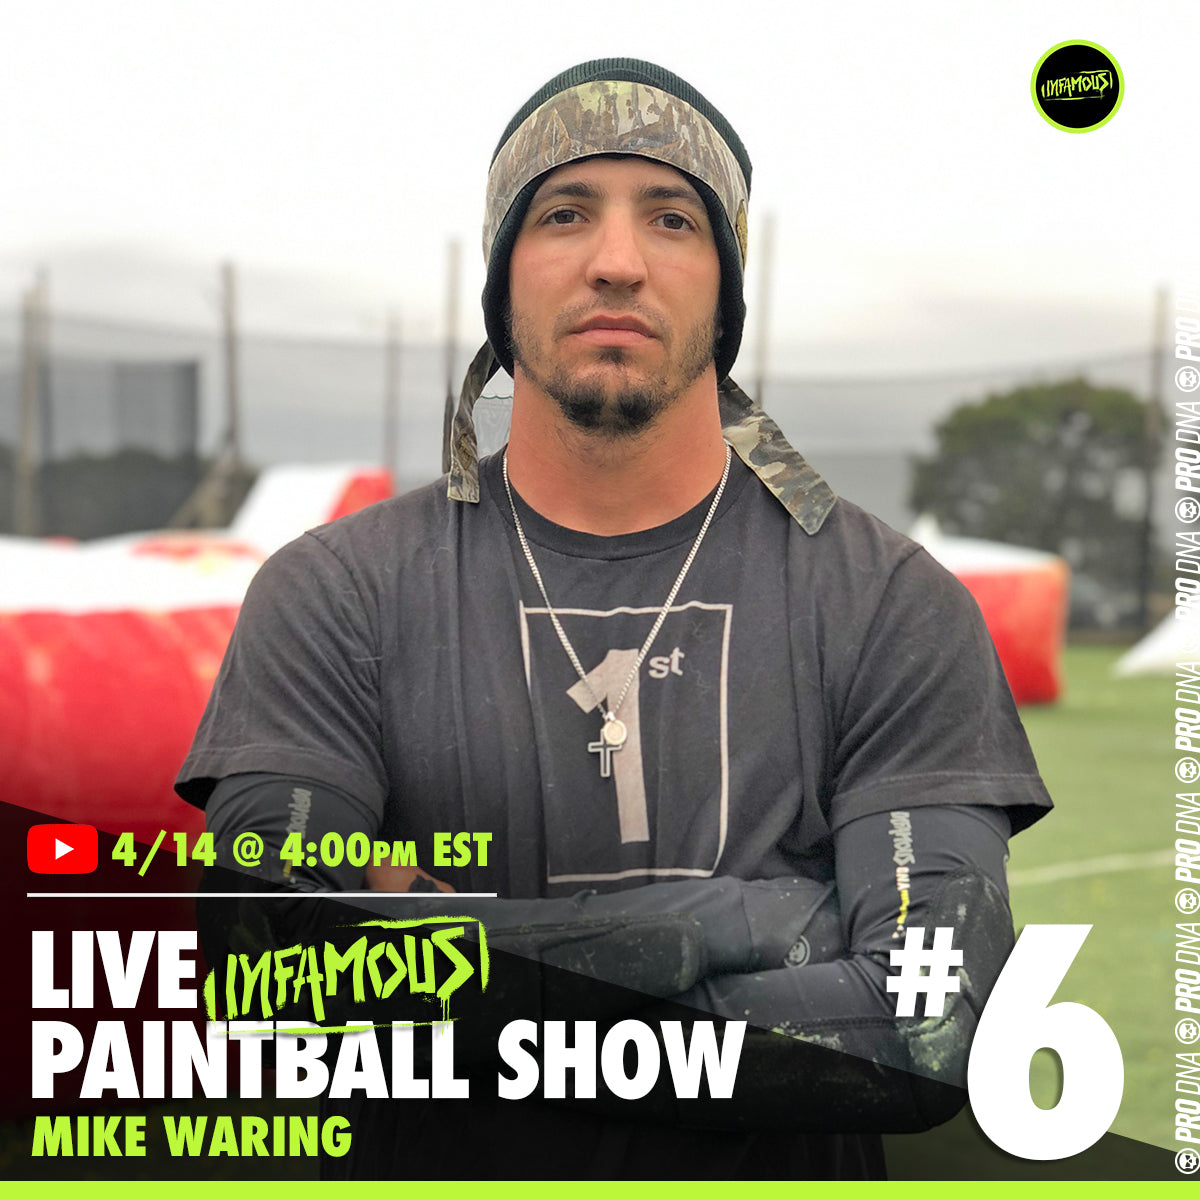 Infamous Paintball Live Show #6 - Mike Waring